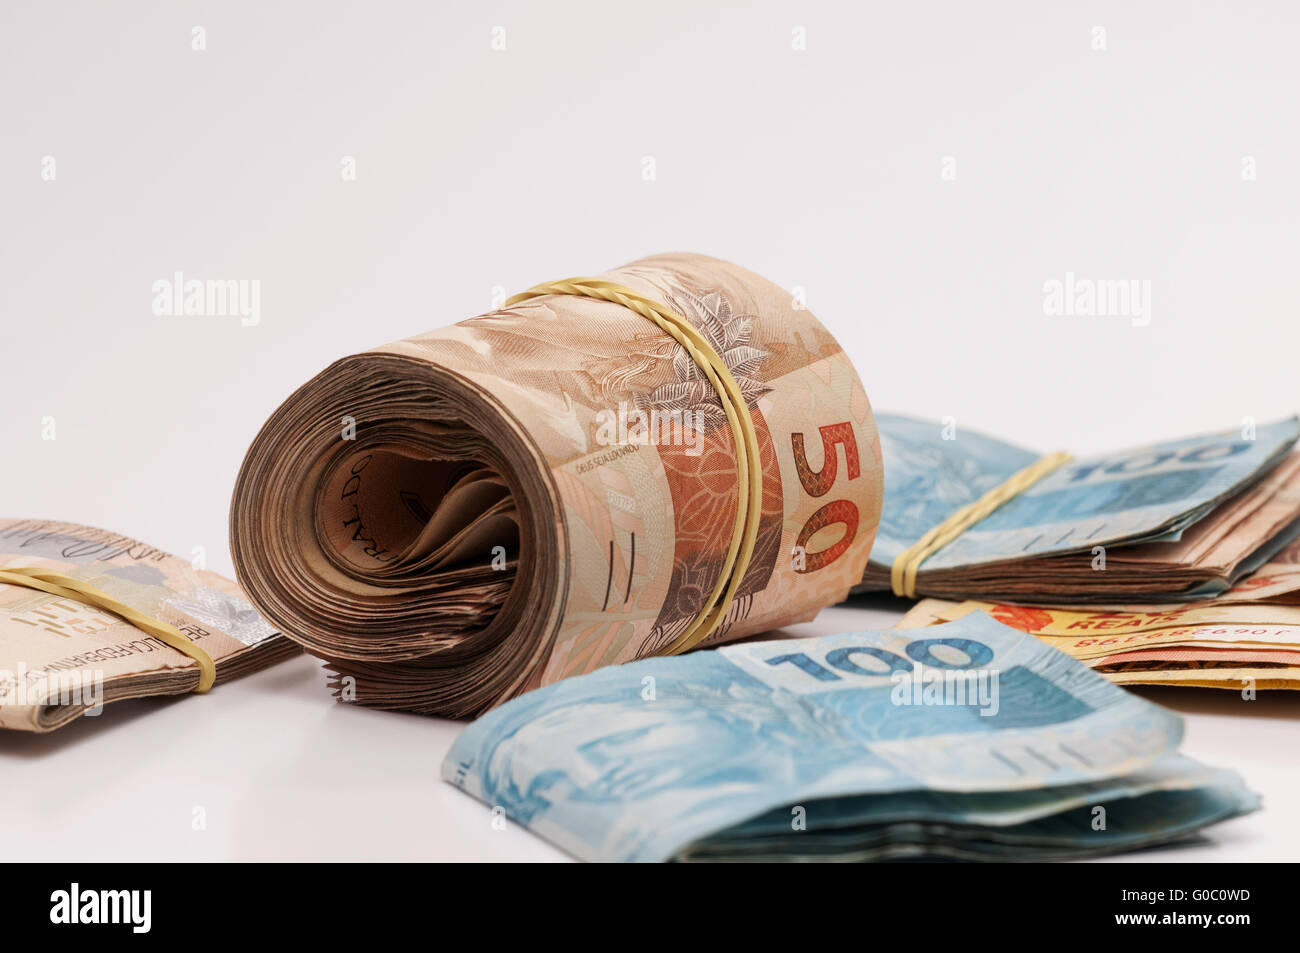 Brazilian Currency (Real) Stock Photo